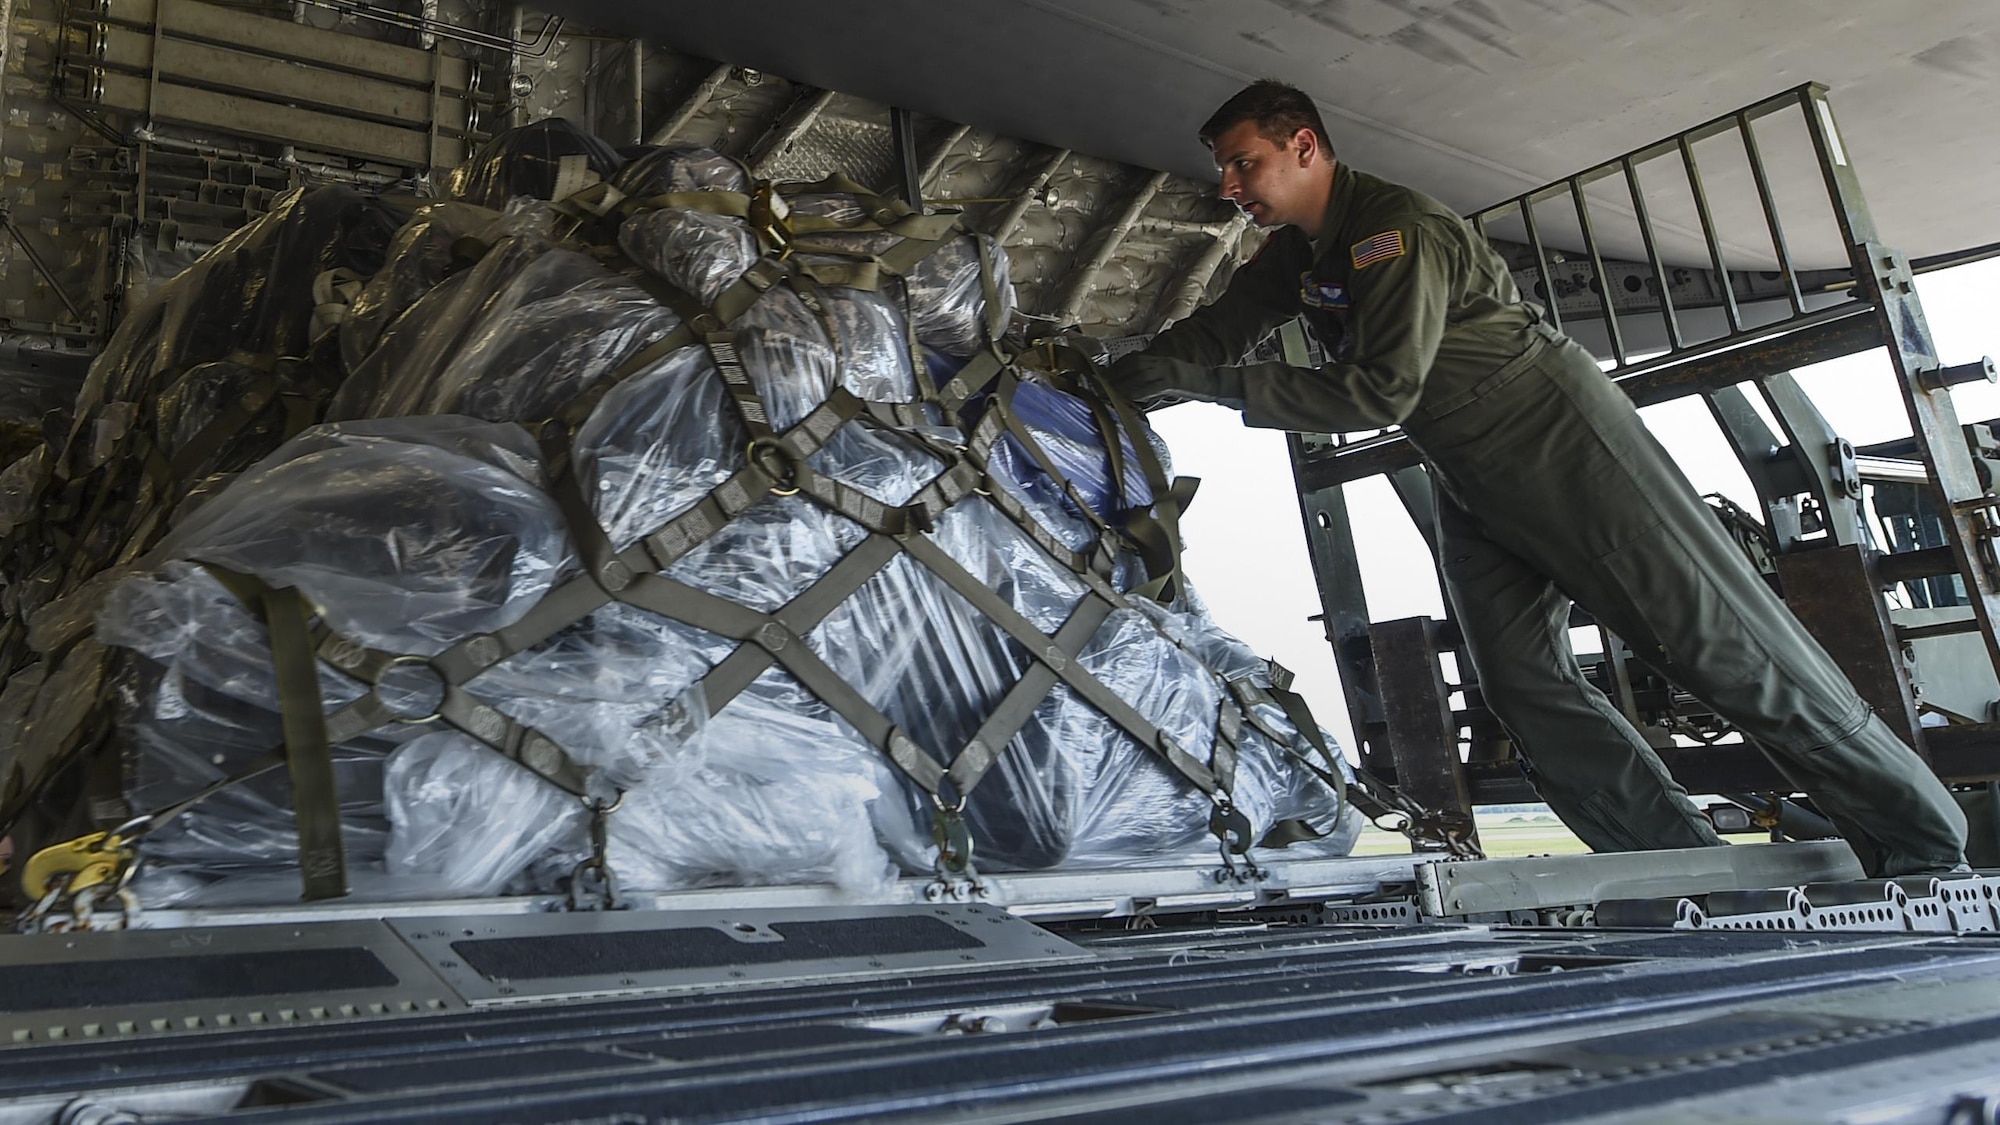 A loadmaster from the 15th Airlift Squadron at Joint Base Charleston, S.C. loads cargo onto a C-17 July 23, 2017, at Little Rock Air Force Base, Ark. Eight Little Rock C-130Js will travel alongside the C-17 aircrew to participate in Mobility Guardian 2017, a massive joint exercise at Joint Base Lewis-McChord, Wash. (U.S. Air Force photo by Staff Sgt. Harry Brexel)